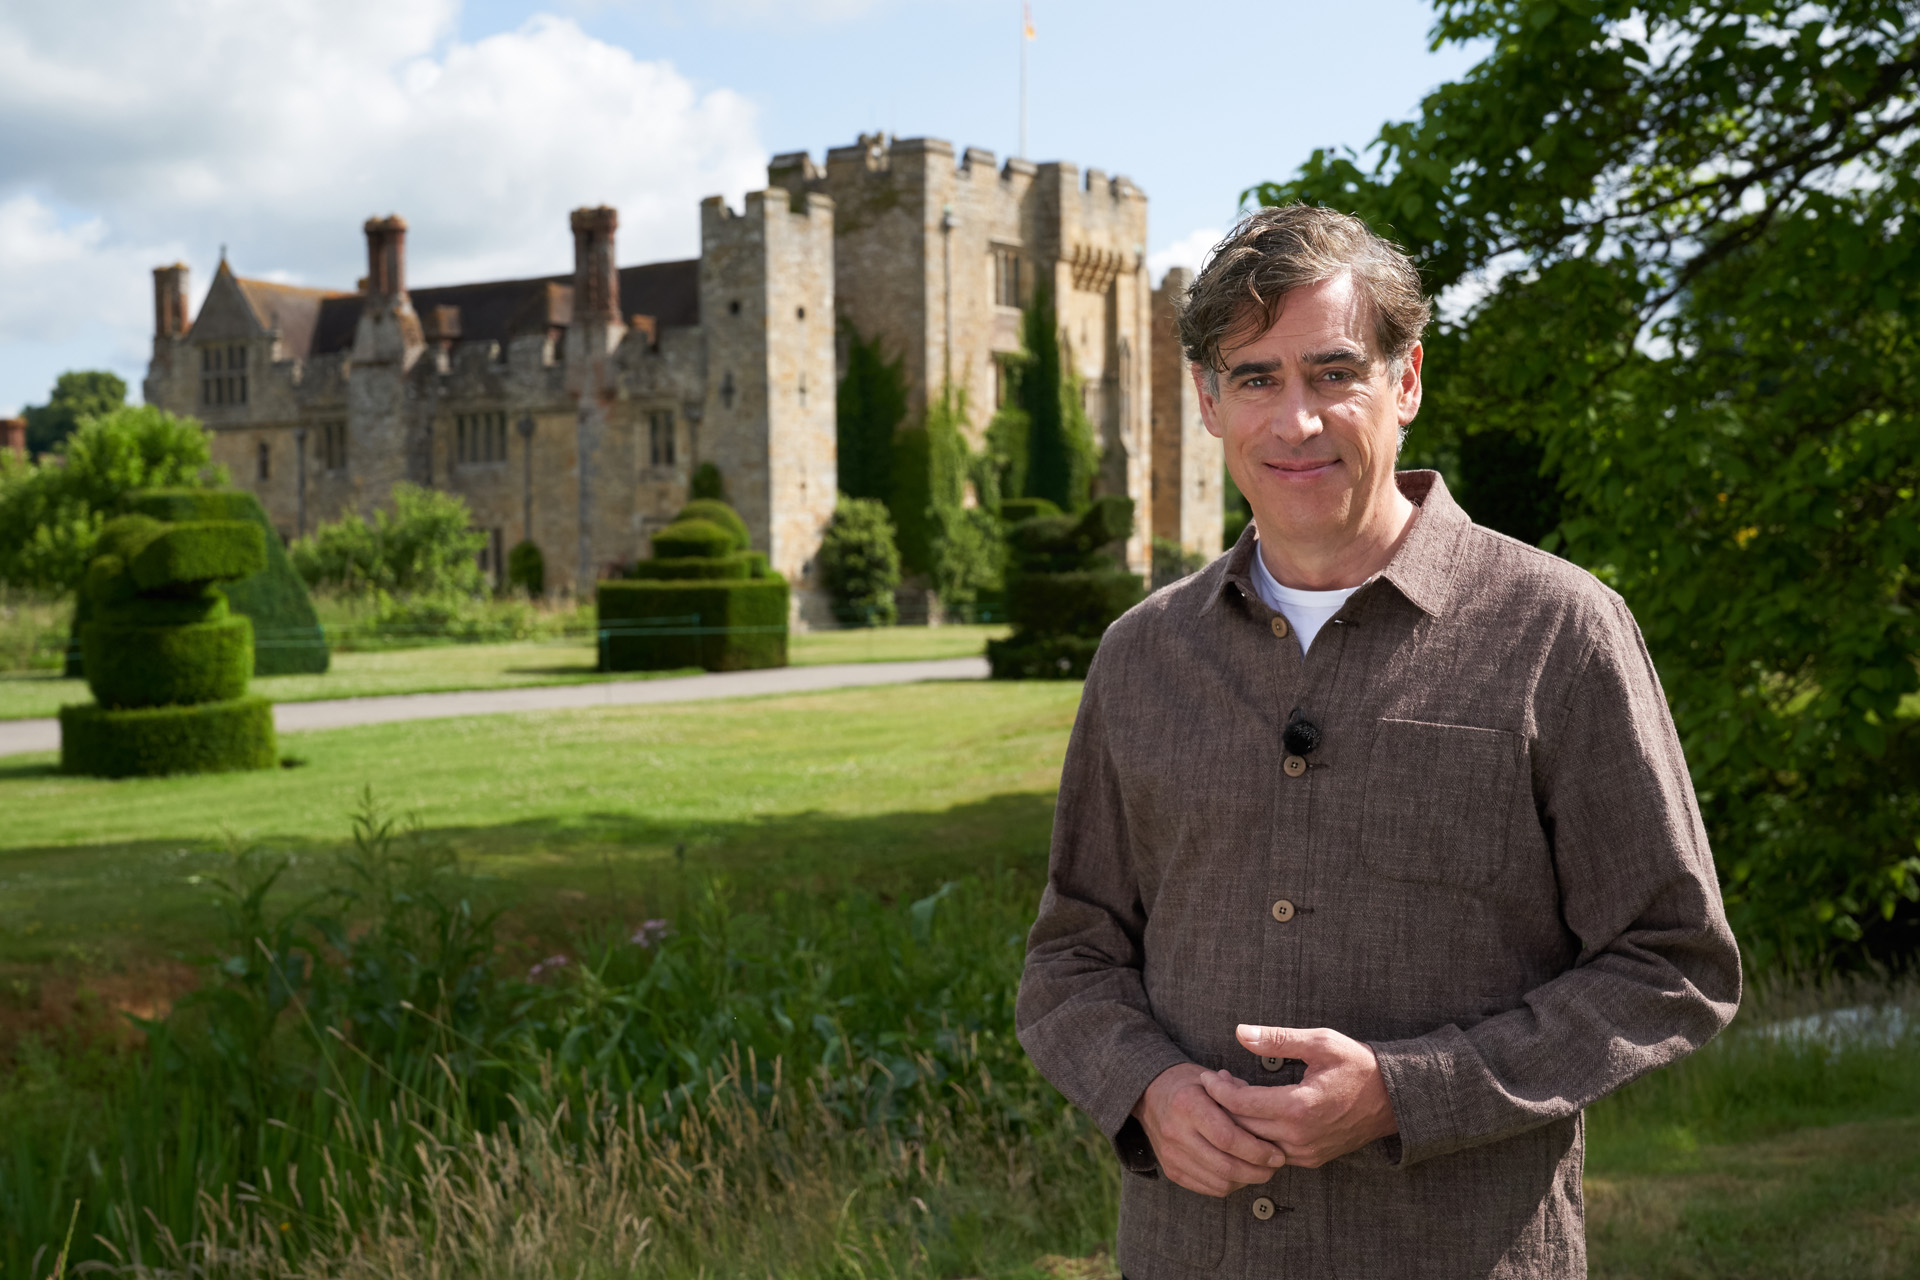 Presenter Stephen Mangan is back with a brand-new series of Landscape Artist of the Year, travelling around the country on the hunt for the nation’s best landscape artist. This year 2000 artists applied and just 48 were selected to take part in six heats. The stunning locations for this year’s competition range from dramatic castles and picturesque harbours to busy urban cityscapes. The artists are working under the watchful eye of judges Kathleen Soriano, Kate Bryan and Tai Shan Schierenberg.